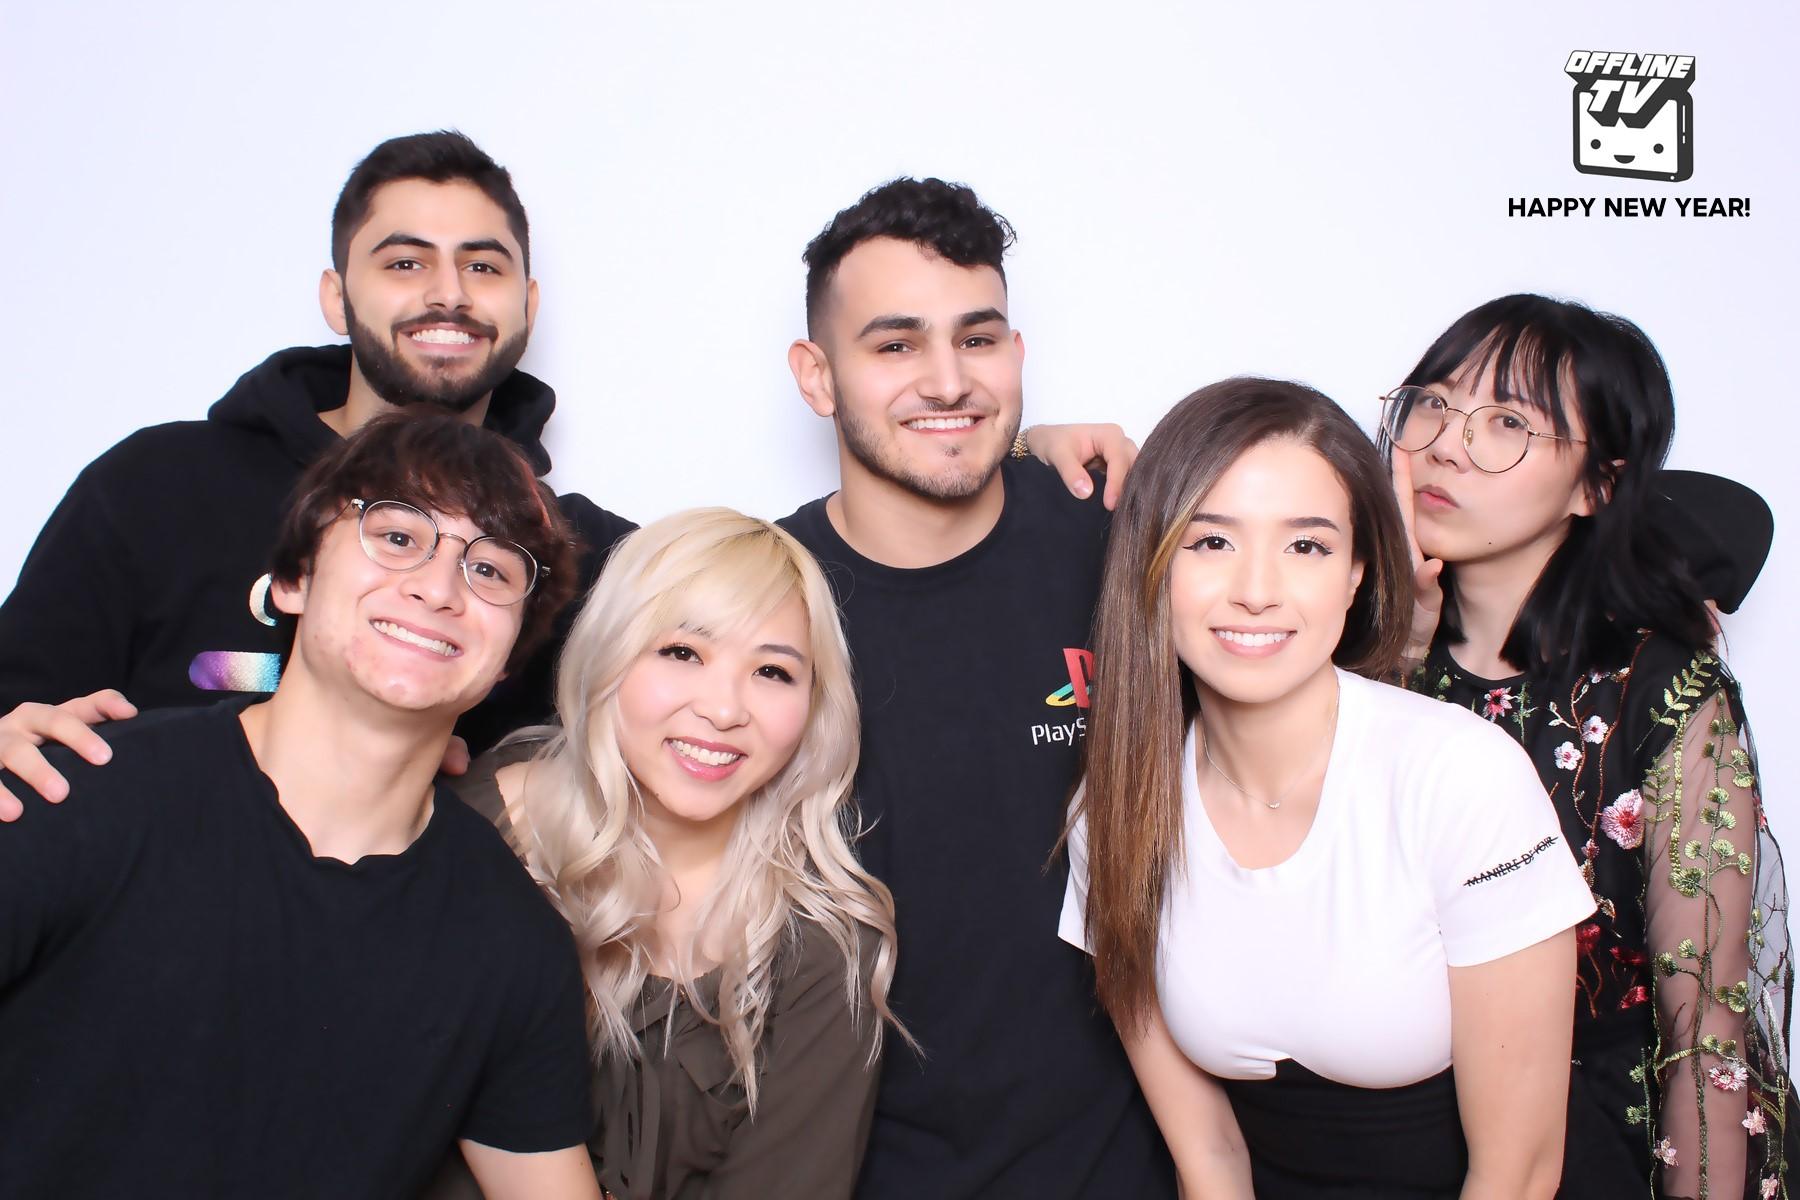 Fedmyster (third from right) has been removed form the OfflineTV house following multiple sexual abuse allegations from other members of the group.